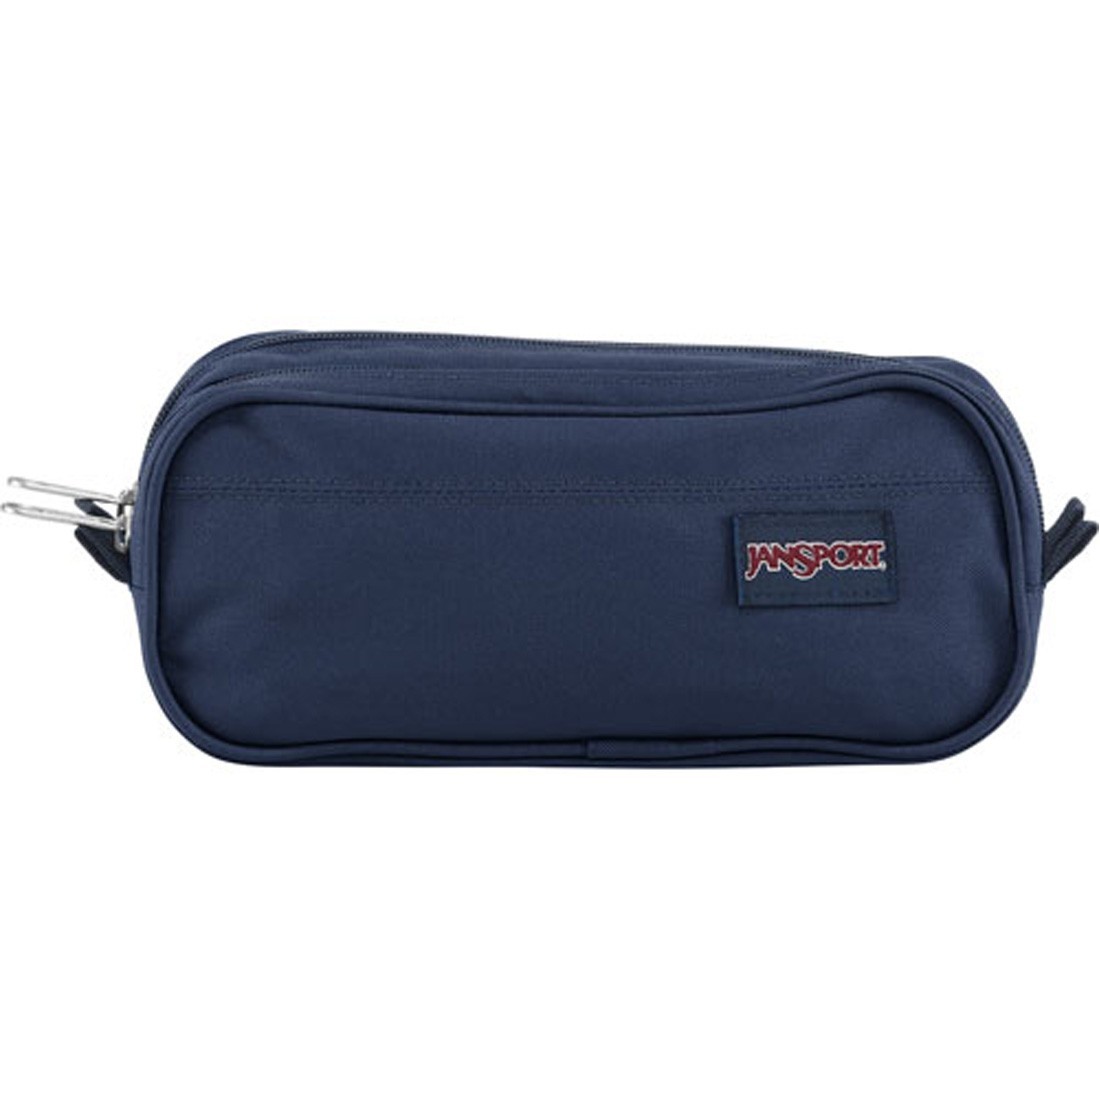 Jetoy Small Pencil Pouch - Blue on Black